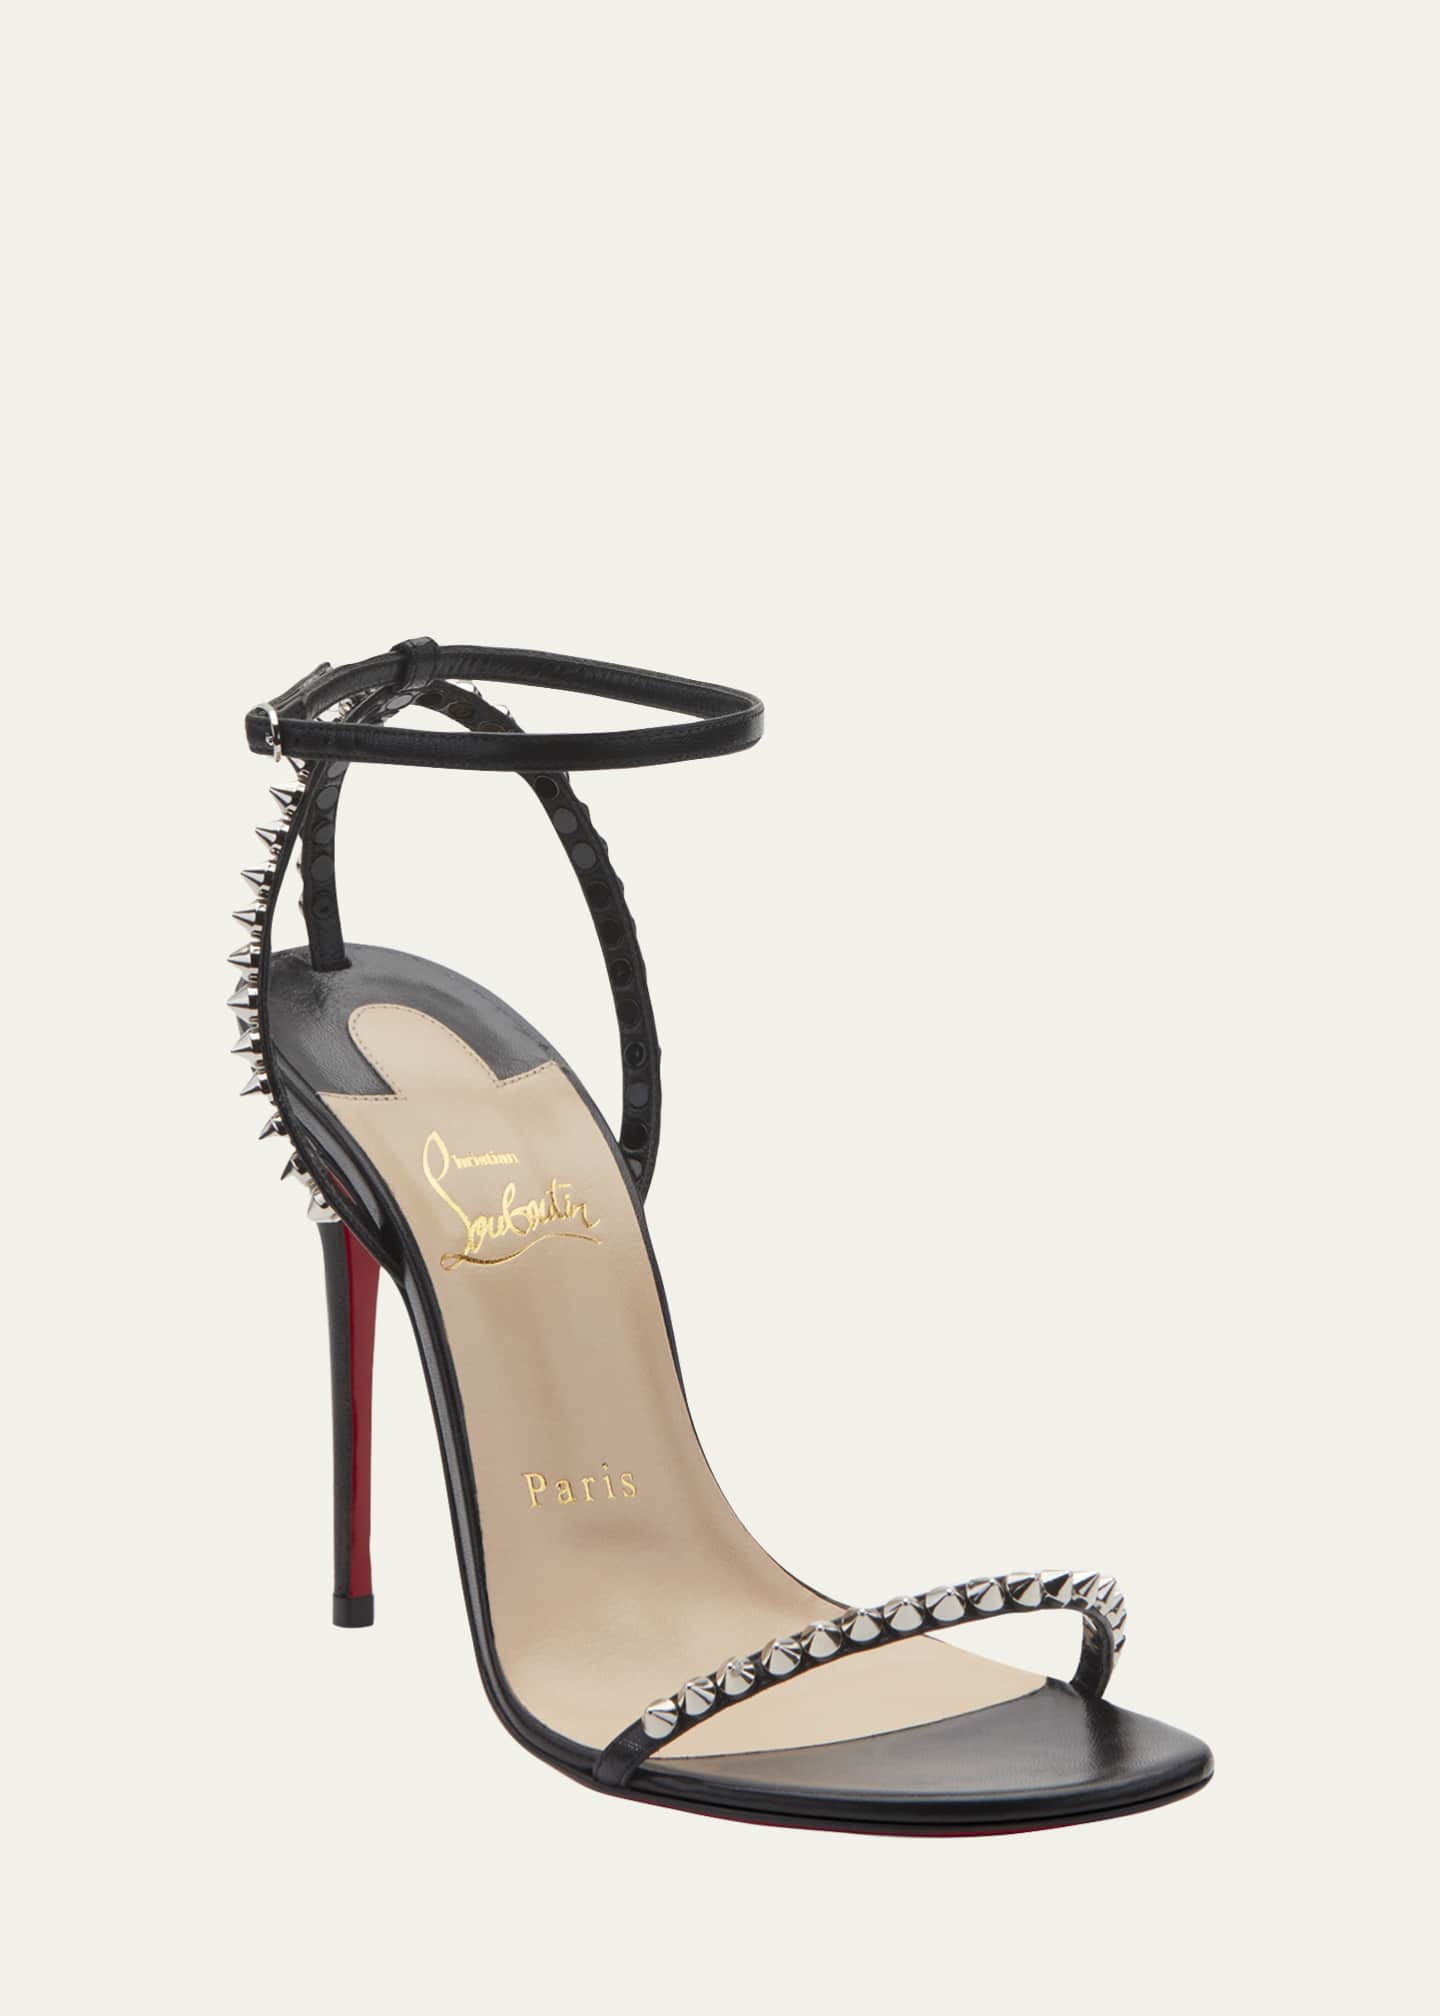 red bottom heels with spikes, christian louboutin shoes prices